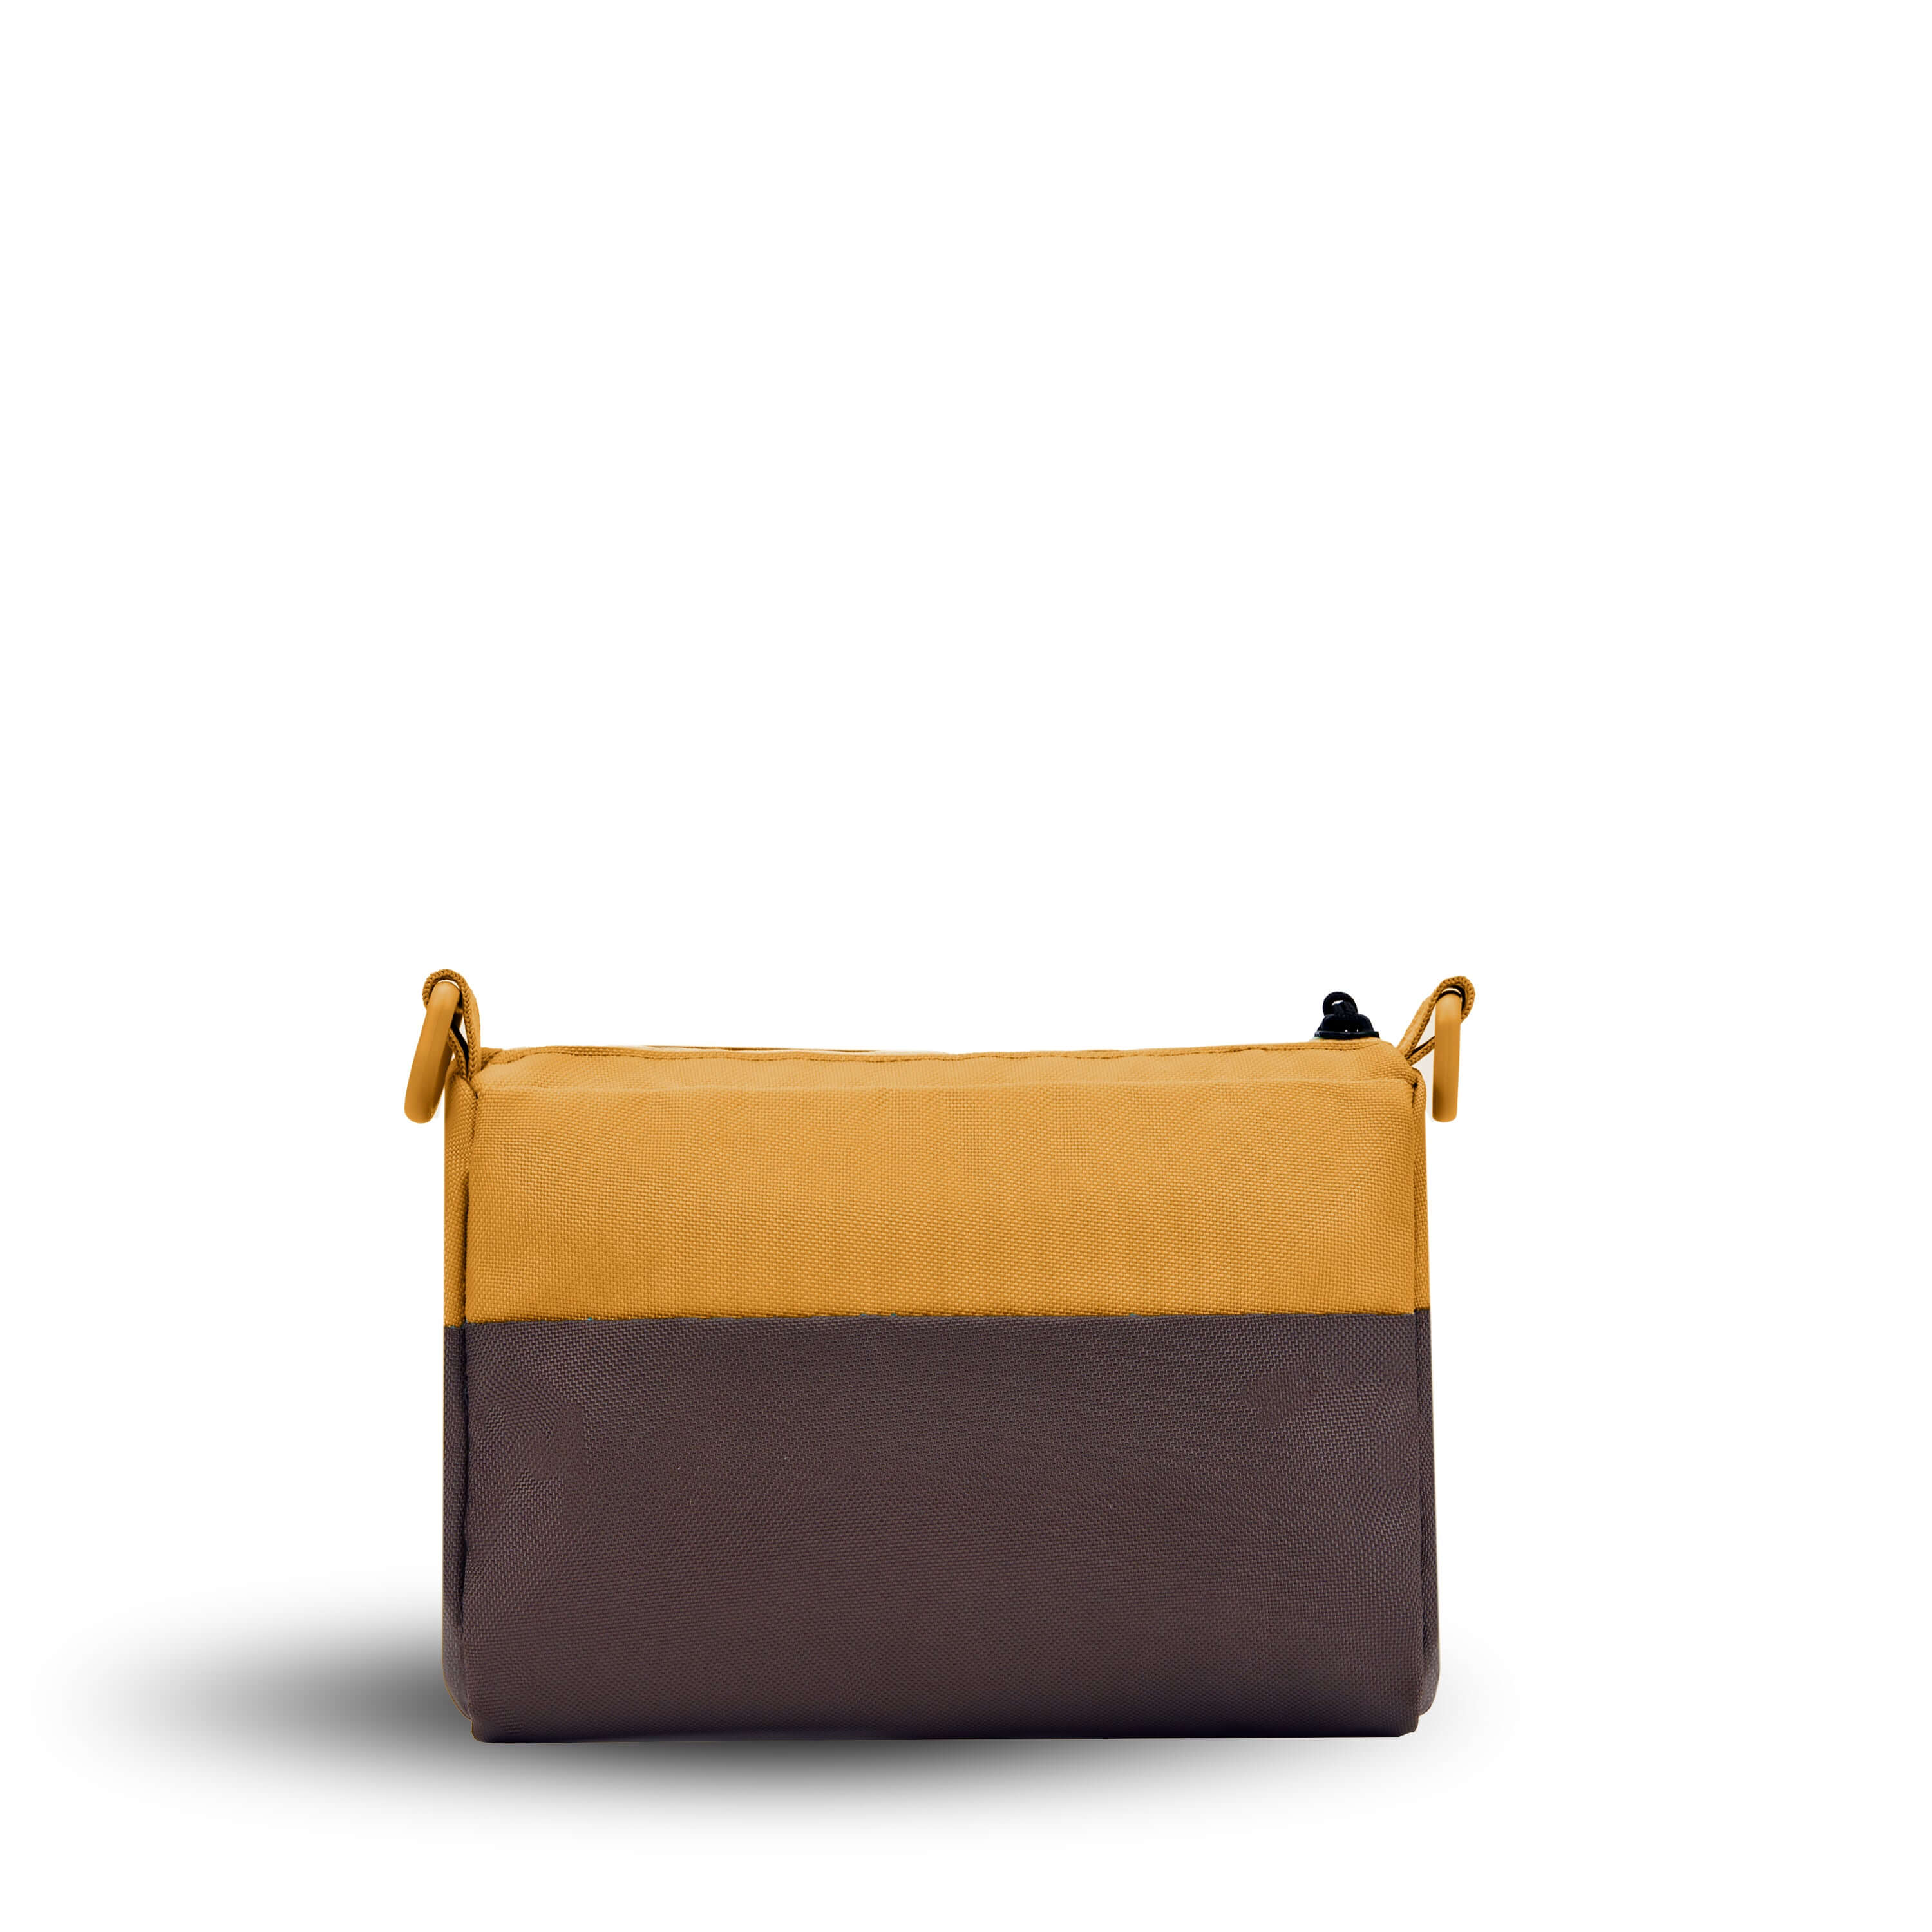 Back view of Sherpani's purse, the Skye in Sundial. It is two-toned, the top half of the bag is burnt yellow and the bottom half of the bag is brown. 